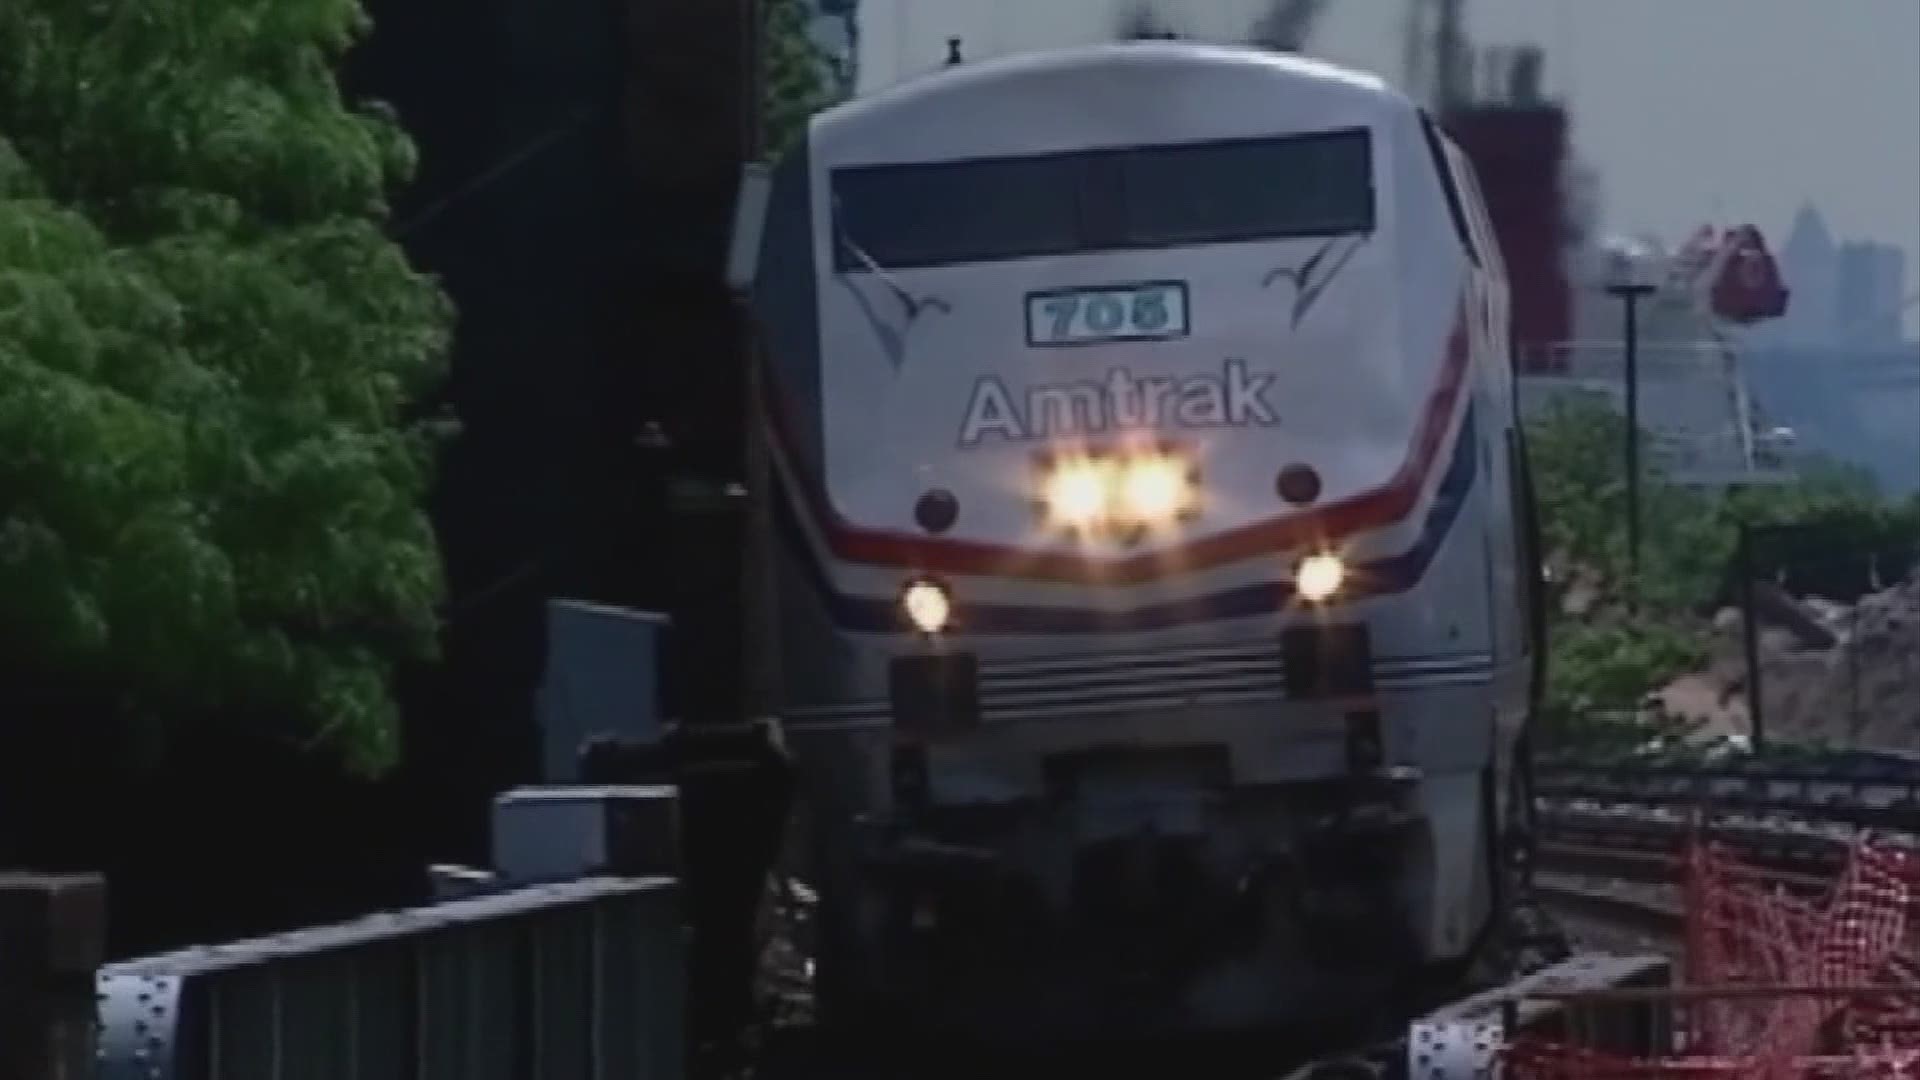 Amtrak hopes to expand its rail service to Ohio, connecting Cleveland, Columbus, Cincinnati, and Dayton.